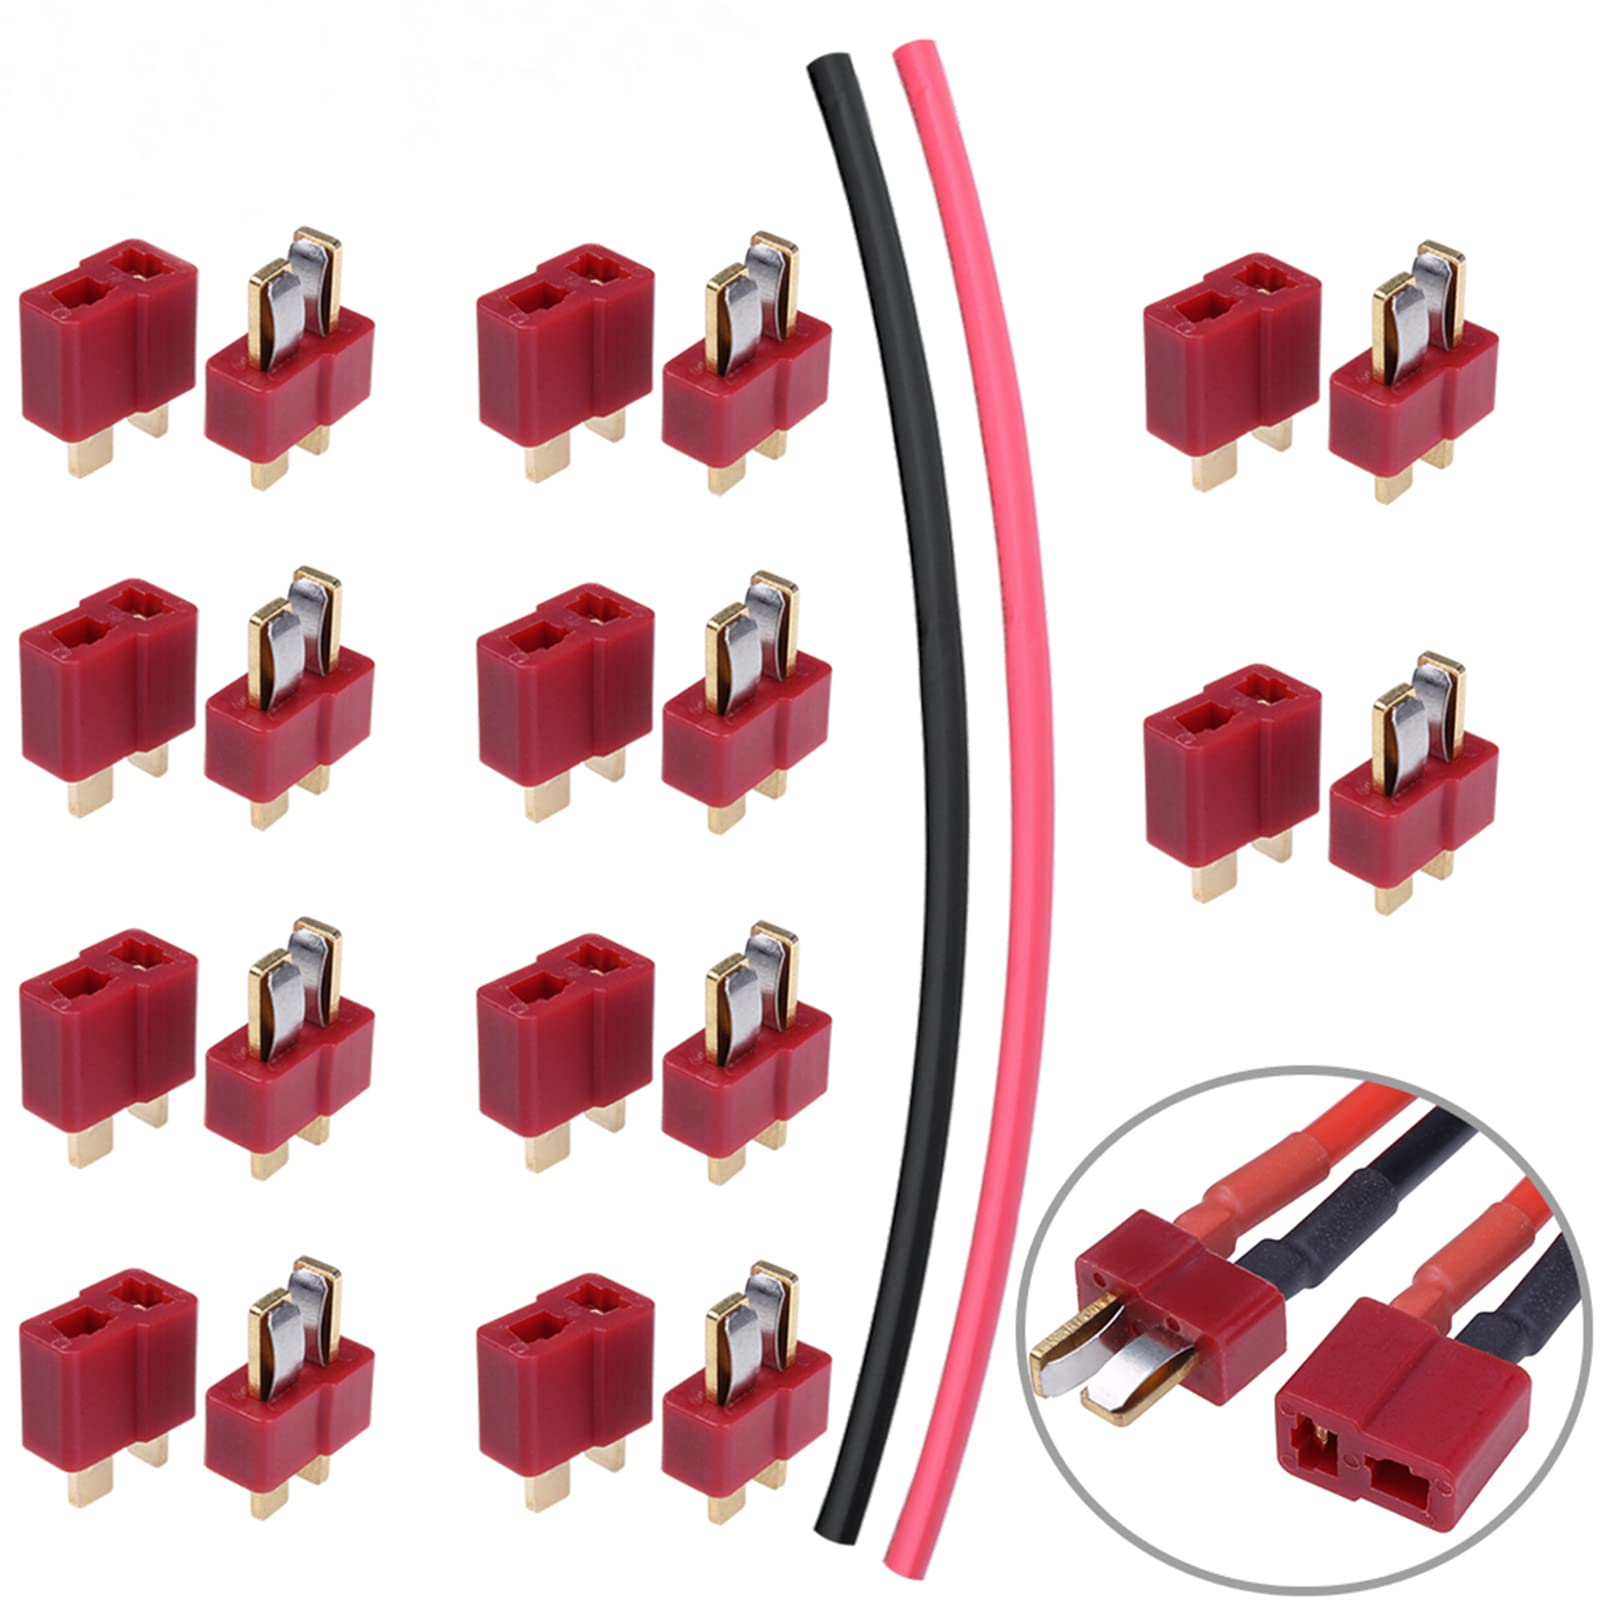 Hobbypark 10 Pairs T-Plug Connectors Male & Female Deans Style w/Shrink Tubing for RC LiPo Battery Pack ESC Electric Engine Motor Parts